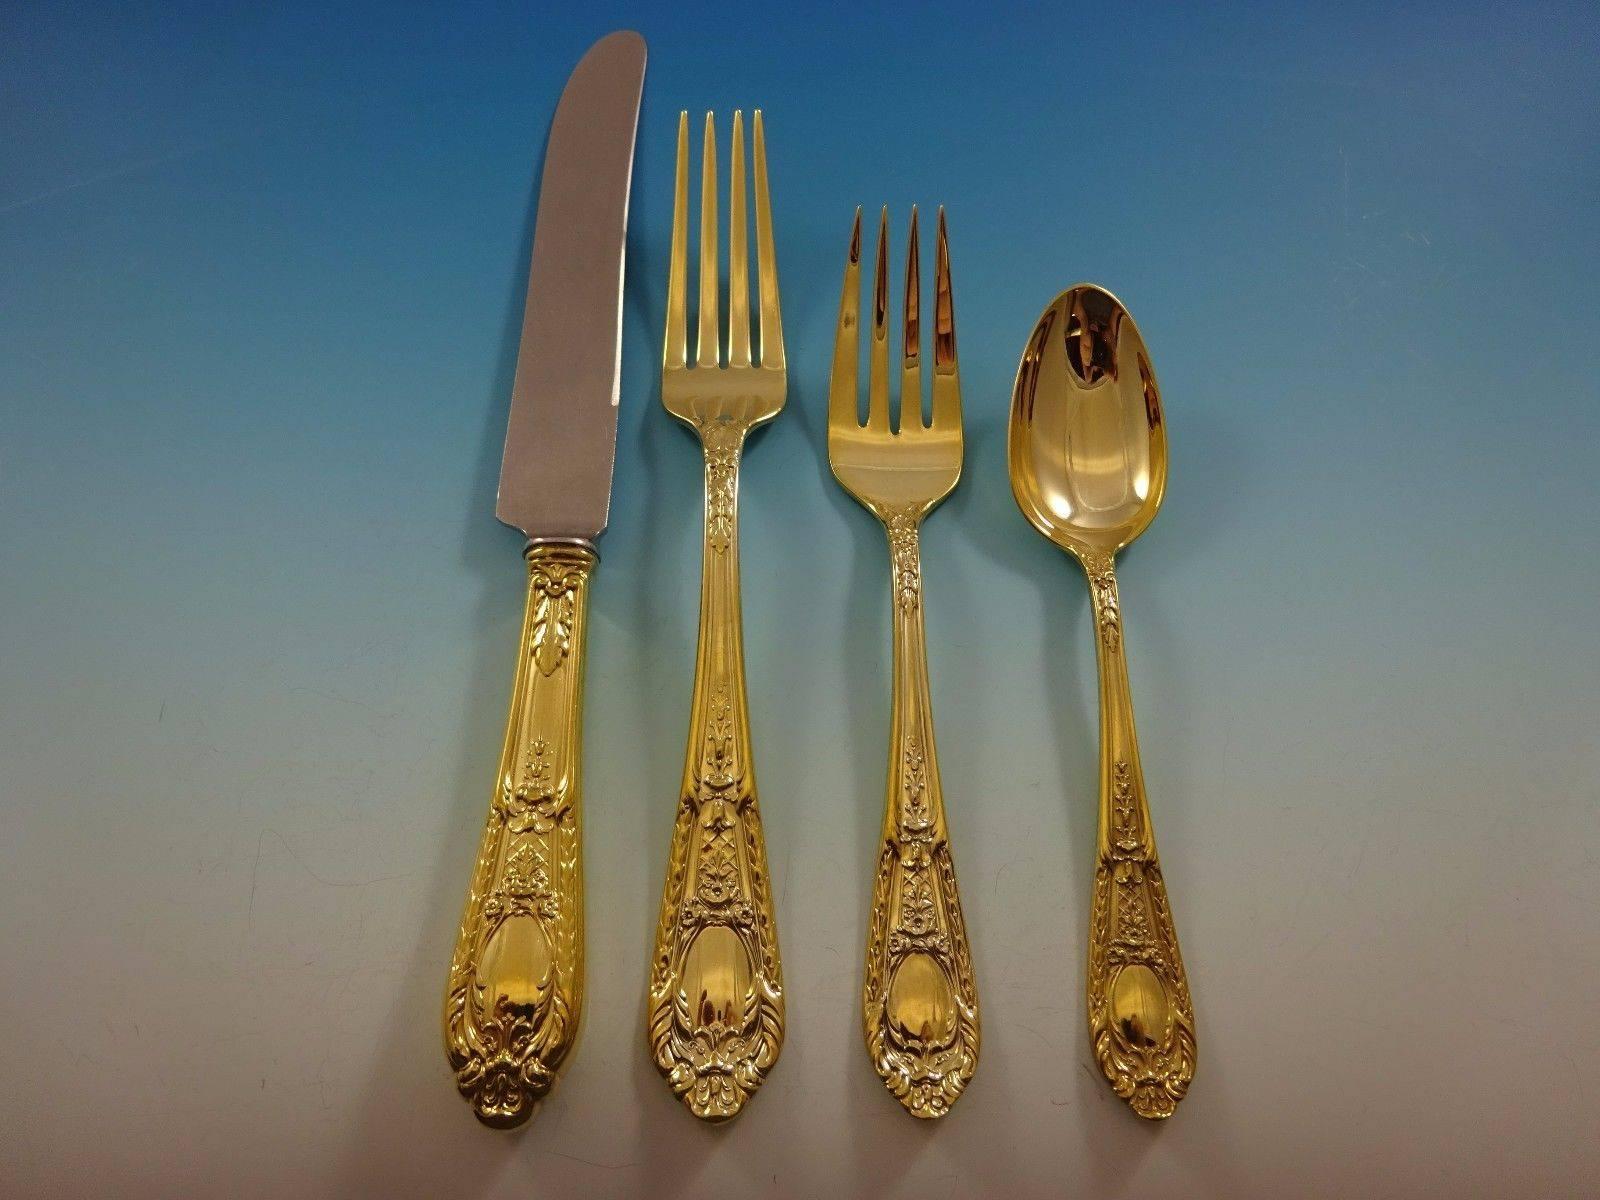 Fontaine Gold by International sterling silver flatware set of 32 pieces. This set is vermeil (completely gold-washed) and includes: 

Eight knives, 8 7/8